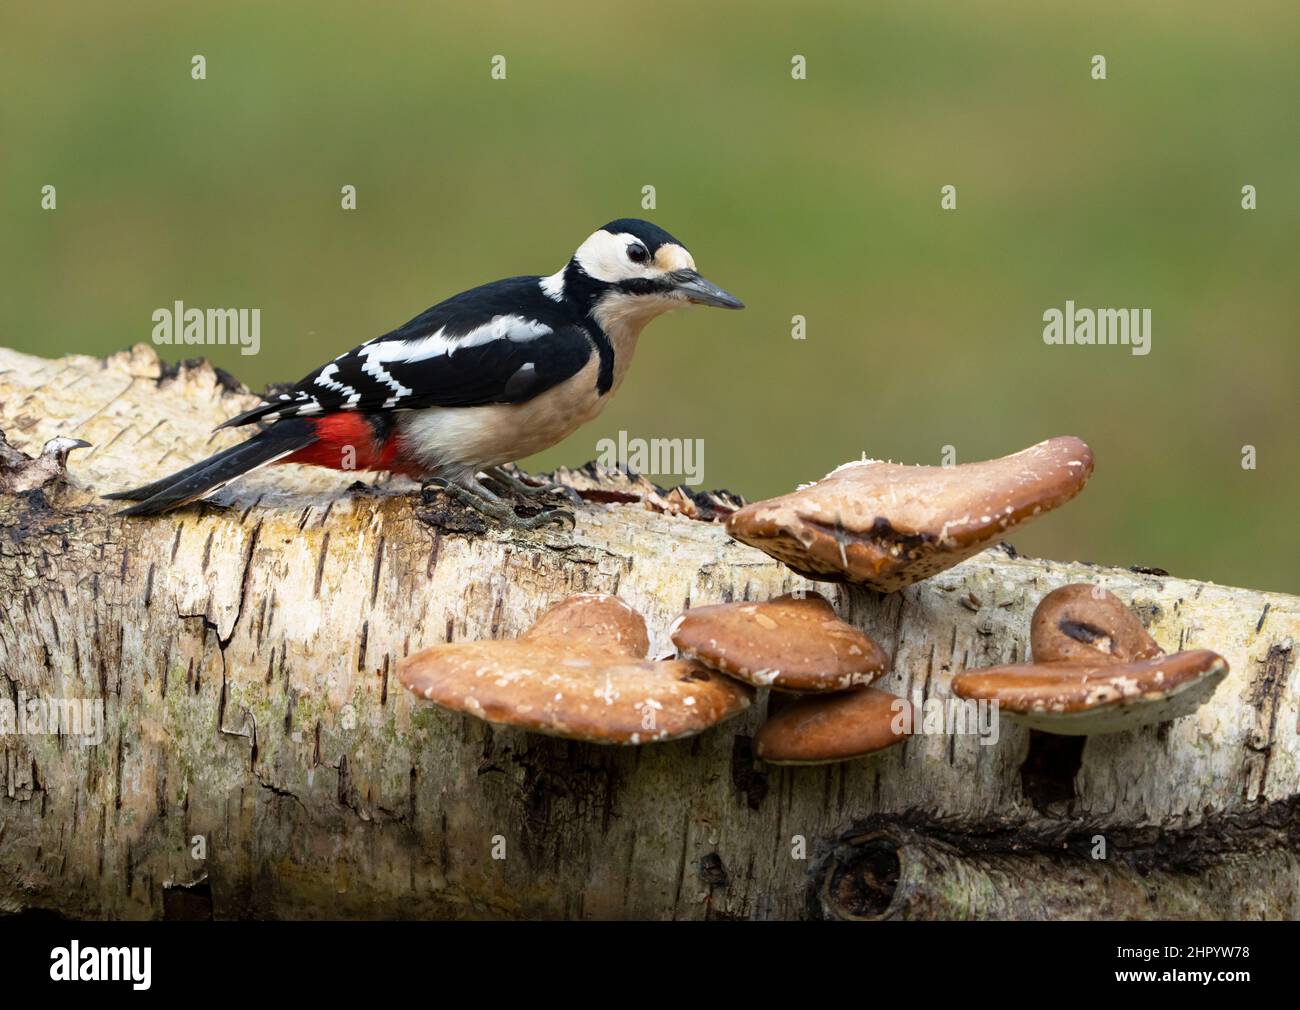 Great spotted woodpecker (Dendrocopos major) perched on a mushroom, England Stock Photo